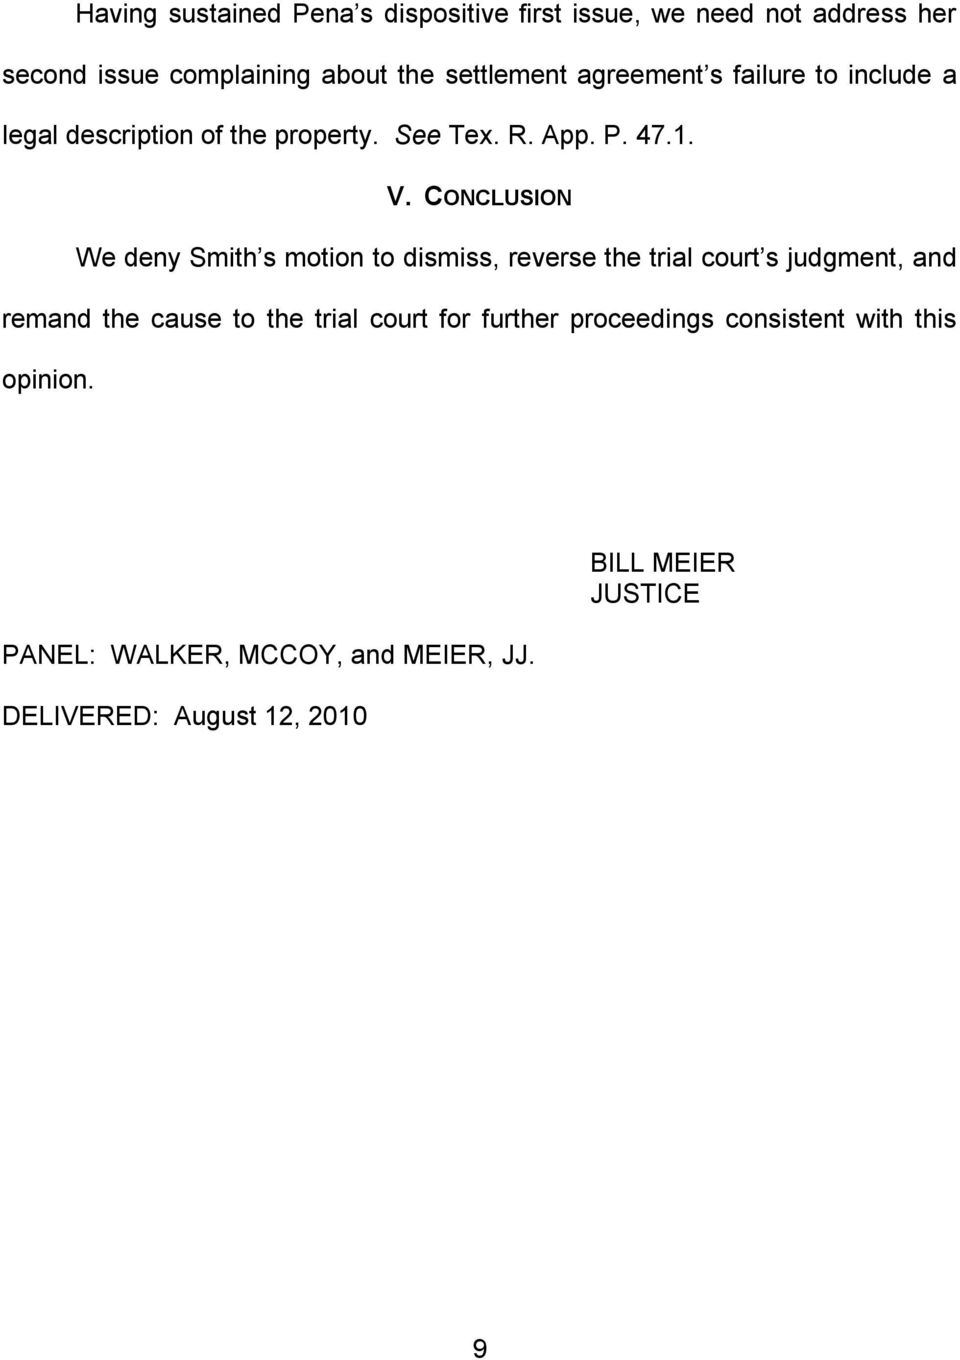 CONCLUSION We deny Smith s motion to dismiss, reverse the trial court s judgment, and remand the cause to the trial